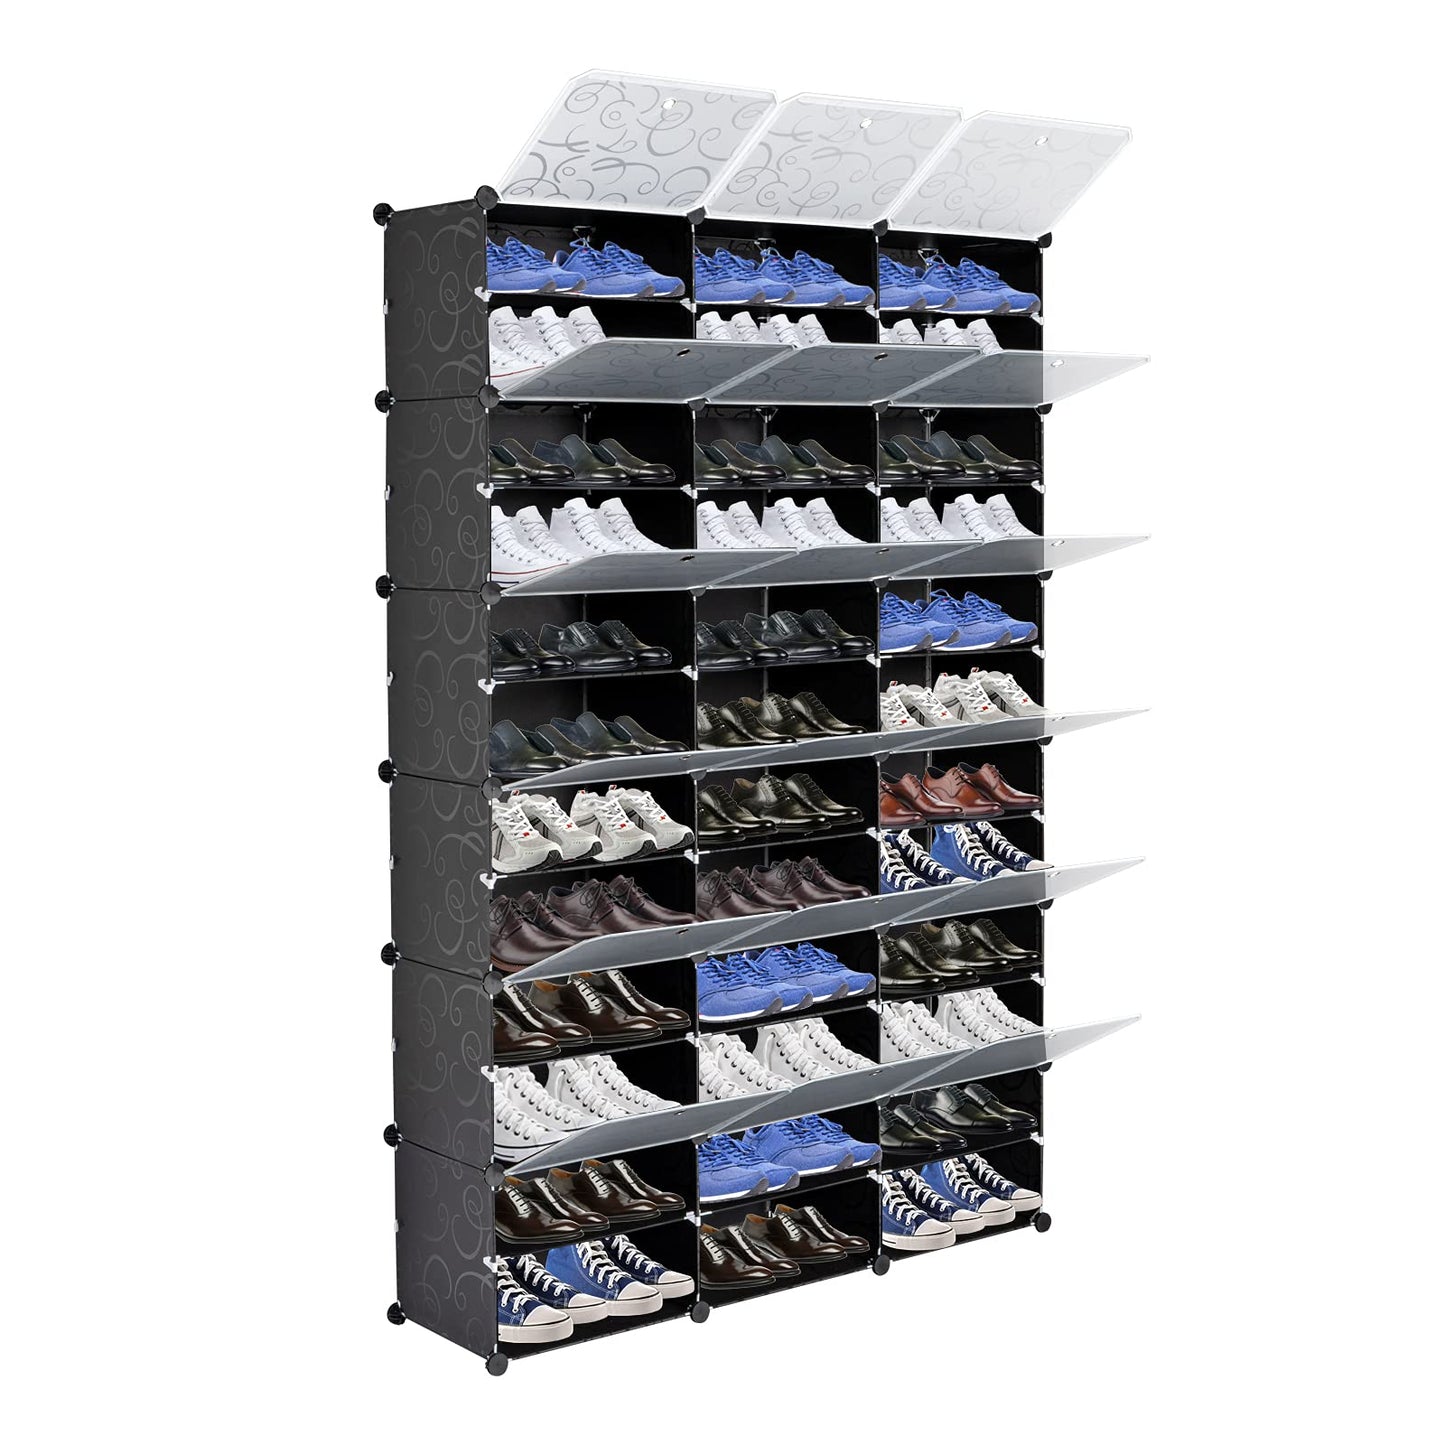 Portable 36 Compartment Shoe Rack Organizer 72 Twin Tower Storage Cabinet Stand Expandable for Heels, Boots, Slippers, 12 Tier Black and White Doors